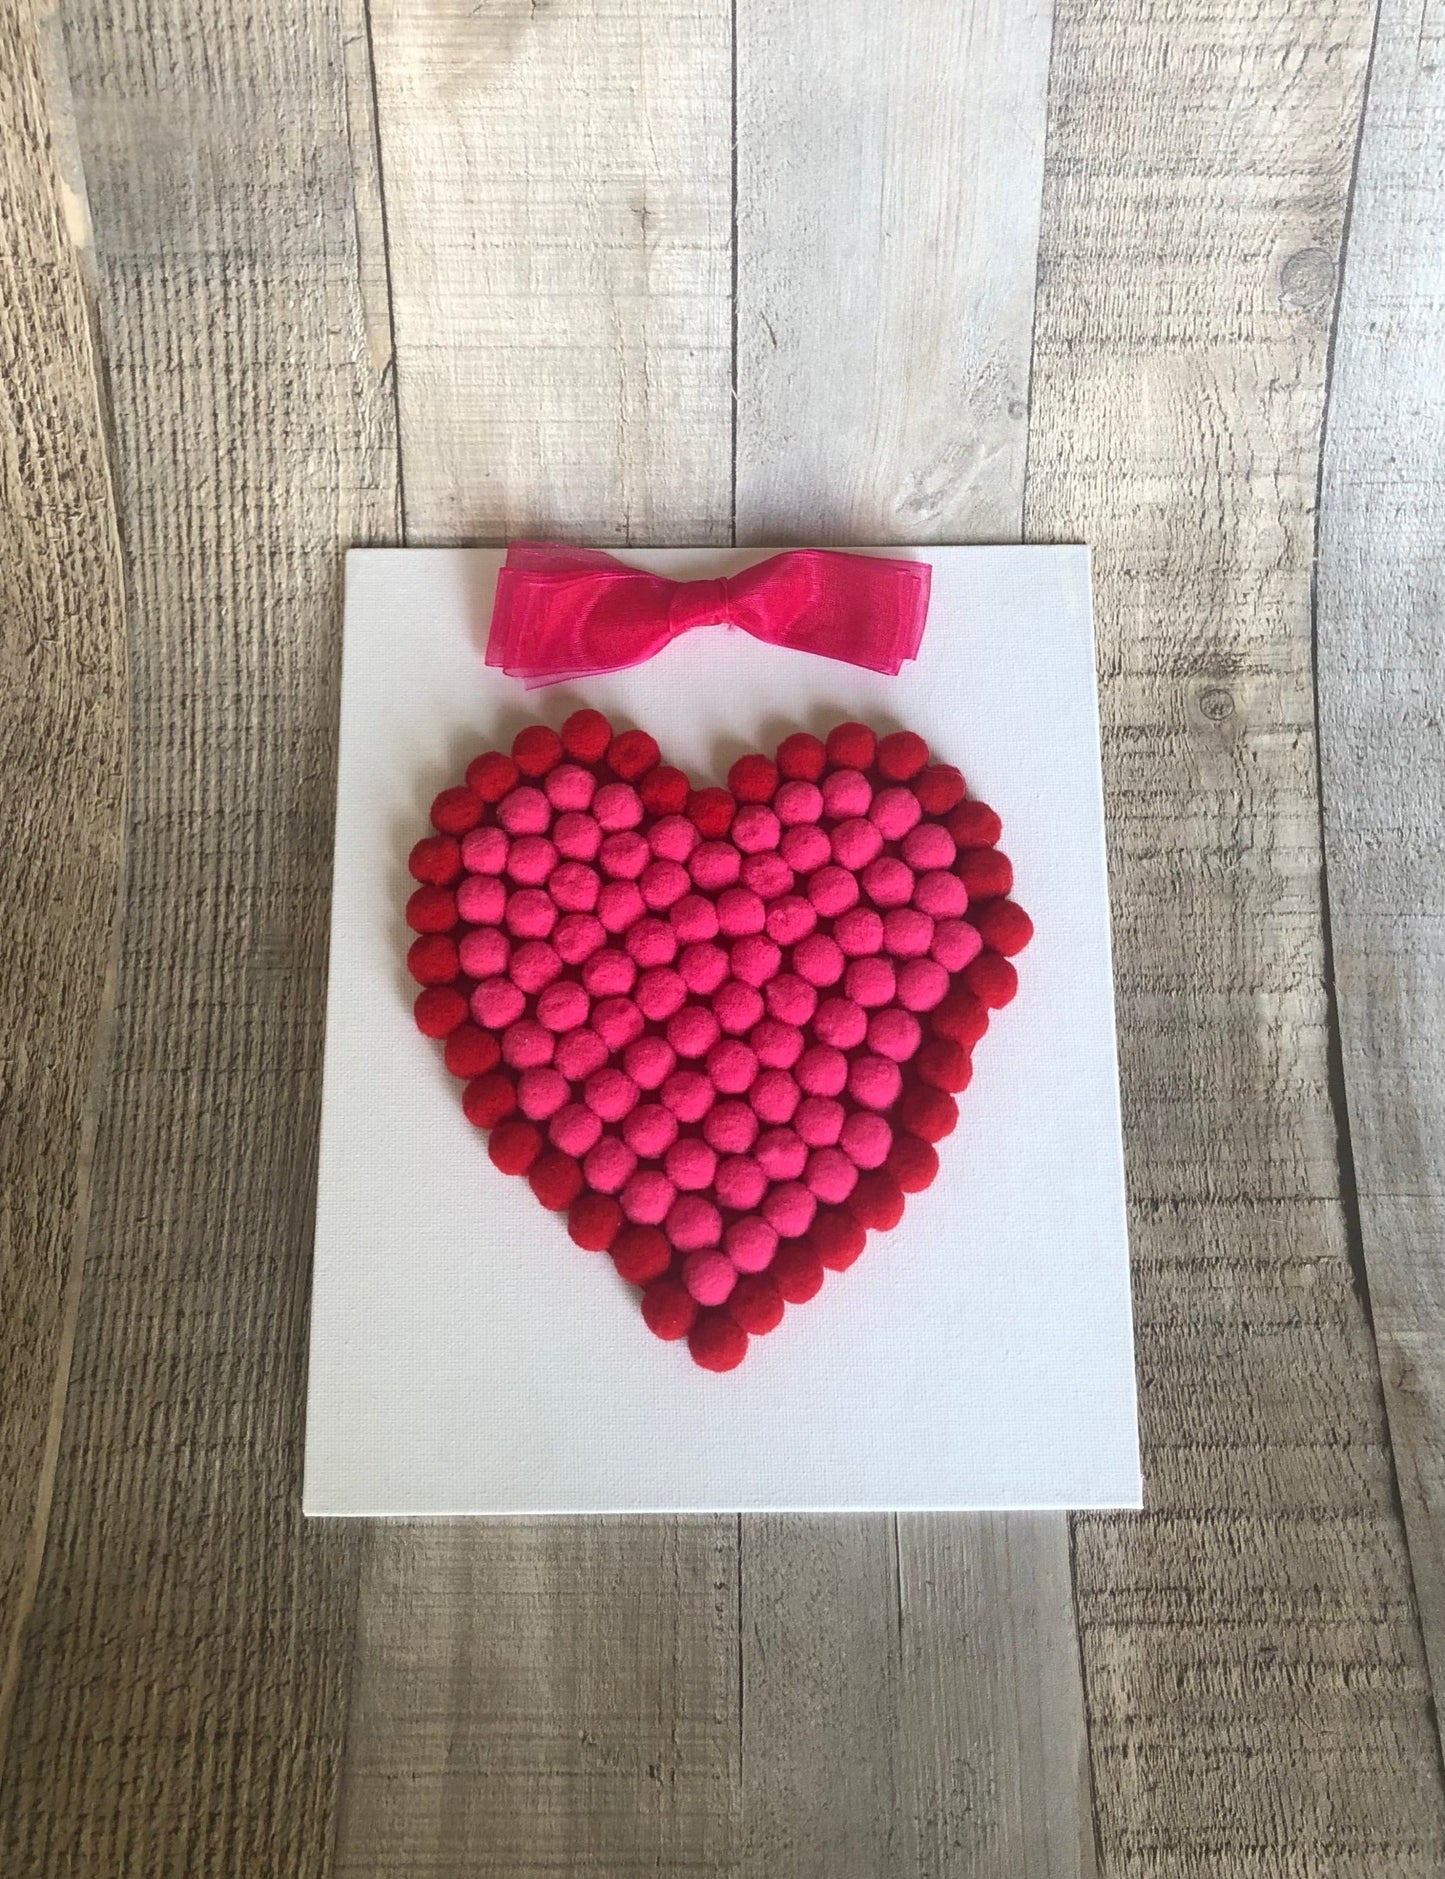 This is a Valentine's heart craft made with mini pom poms in red and hot pink. The craft kit is available on seniorlycreations.com.